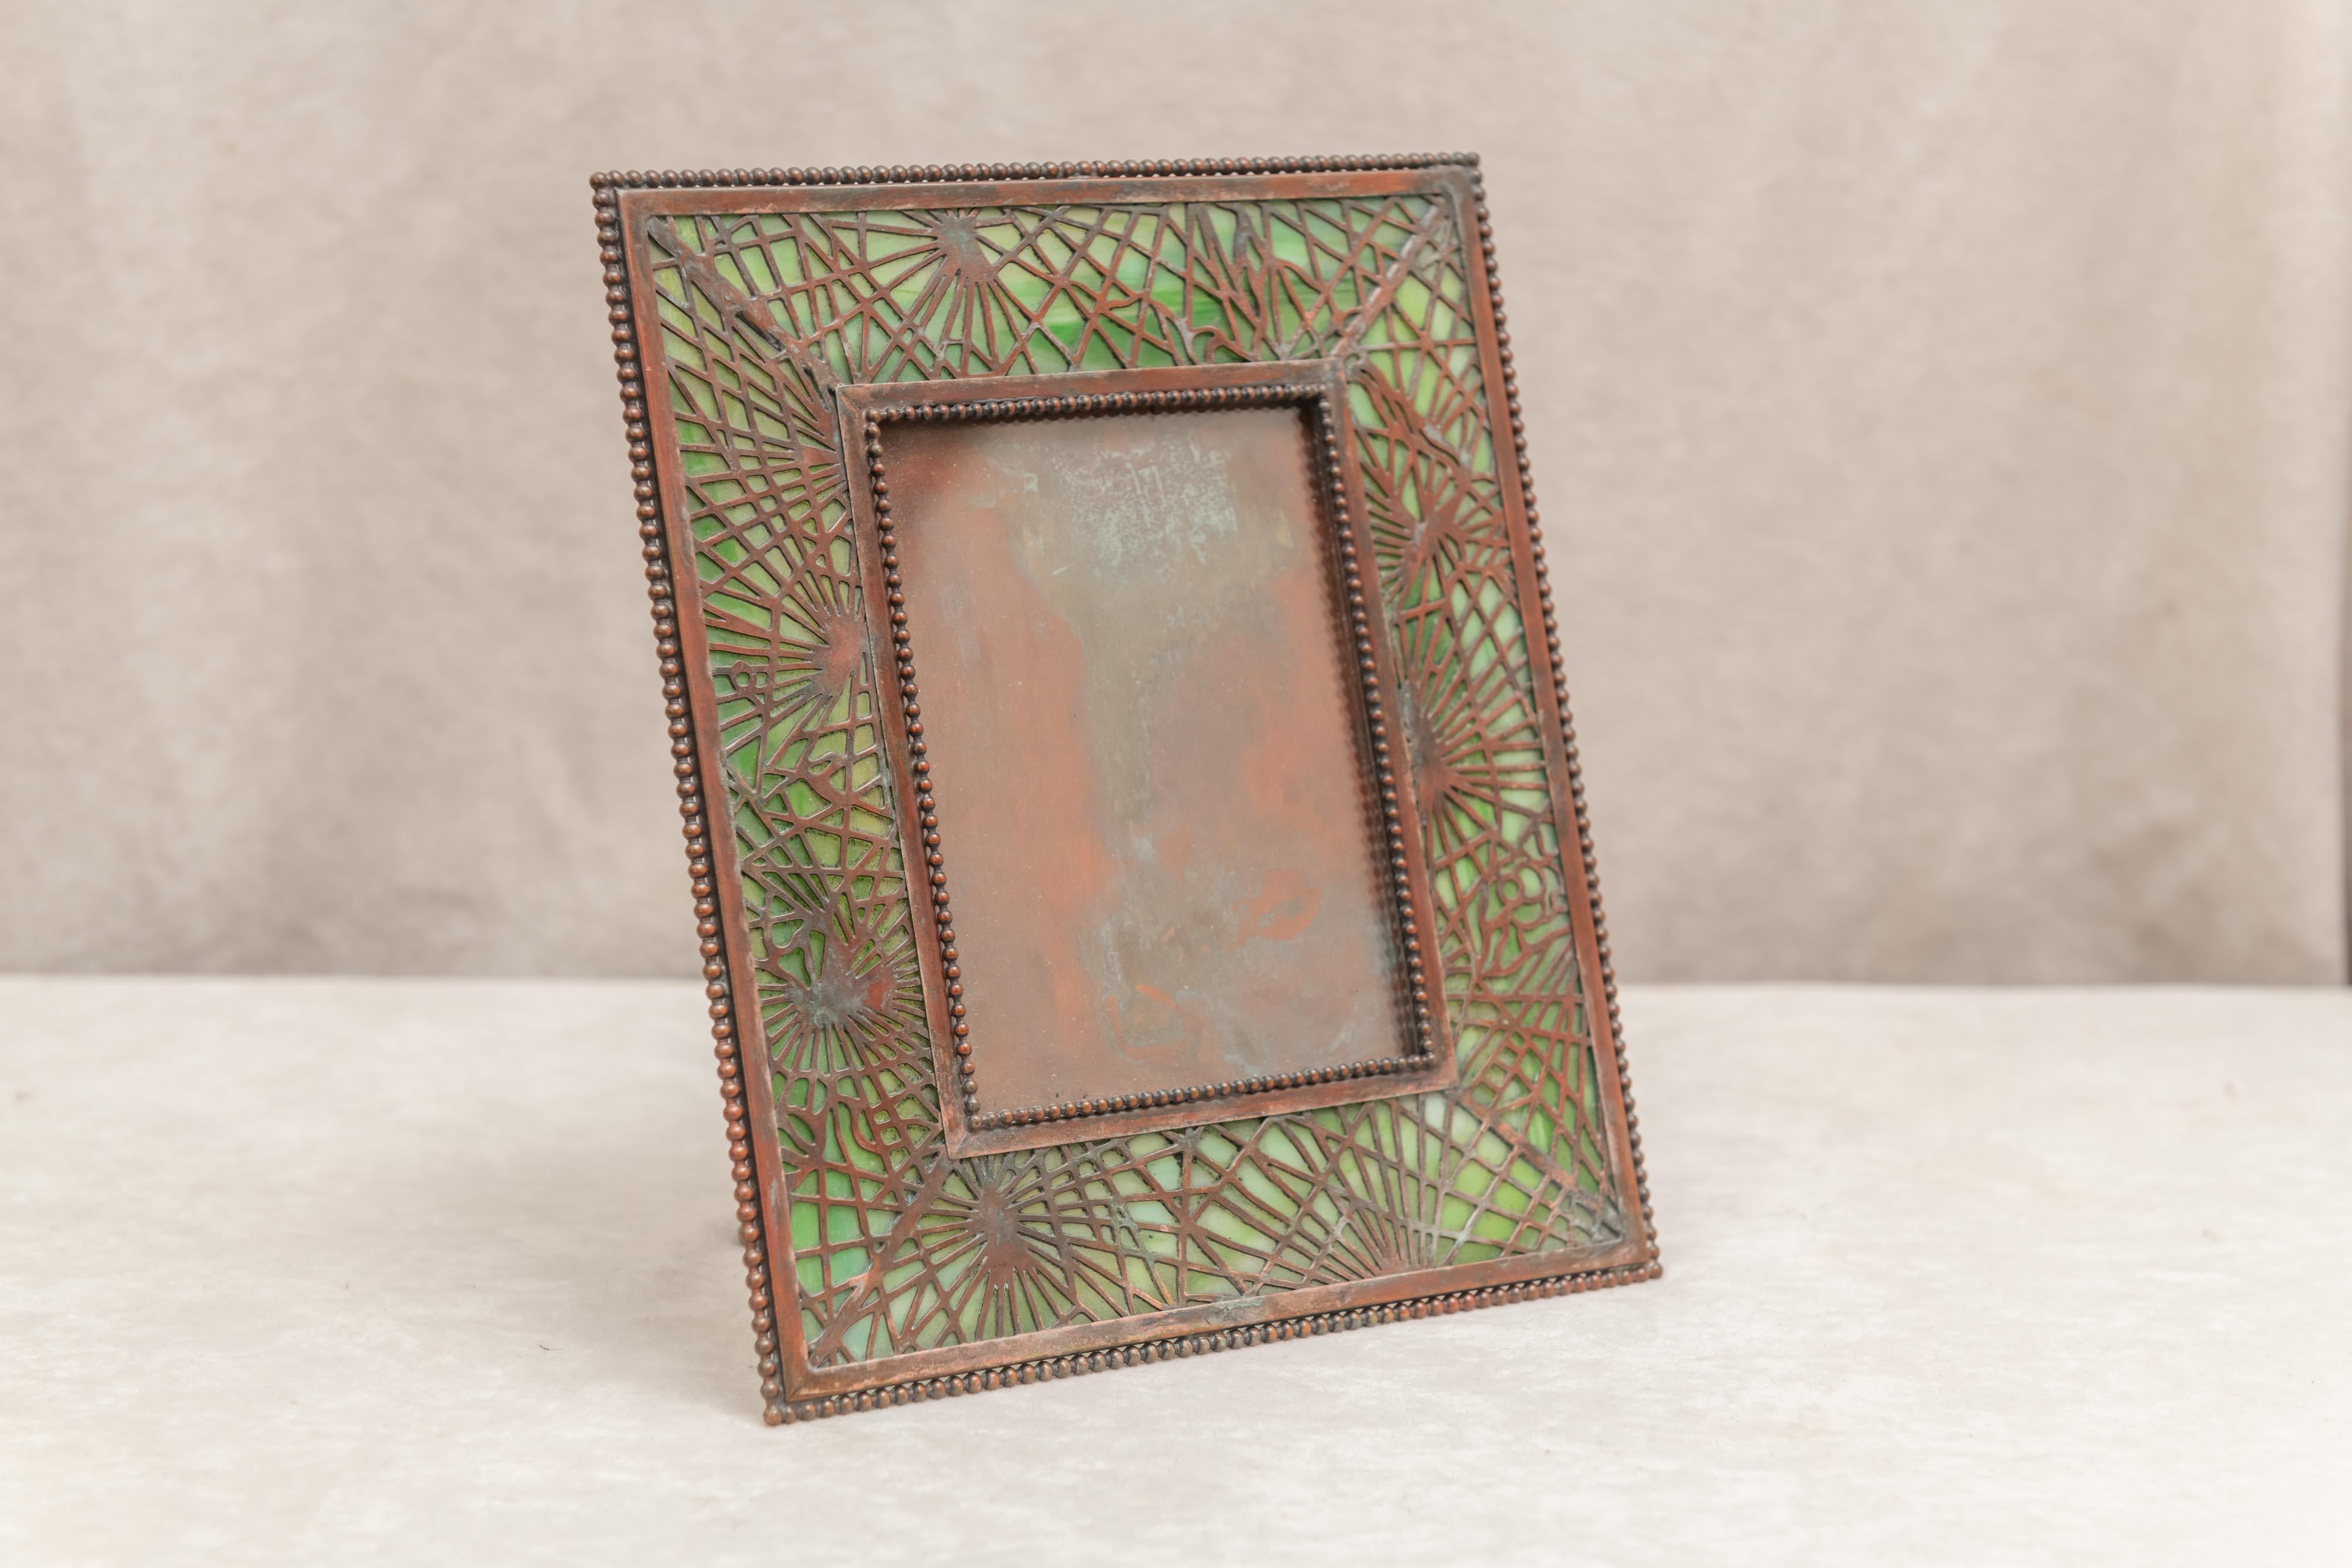 Glass Tiffany Studios Picture Frame with Pine Needle Design, circa 1905